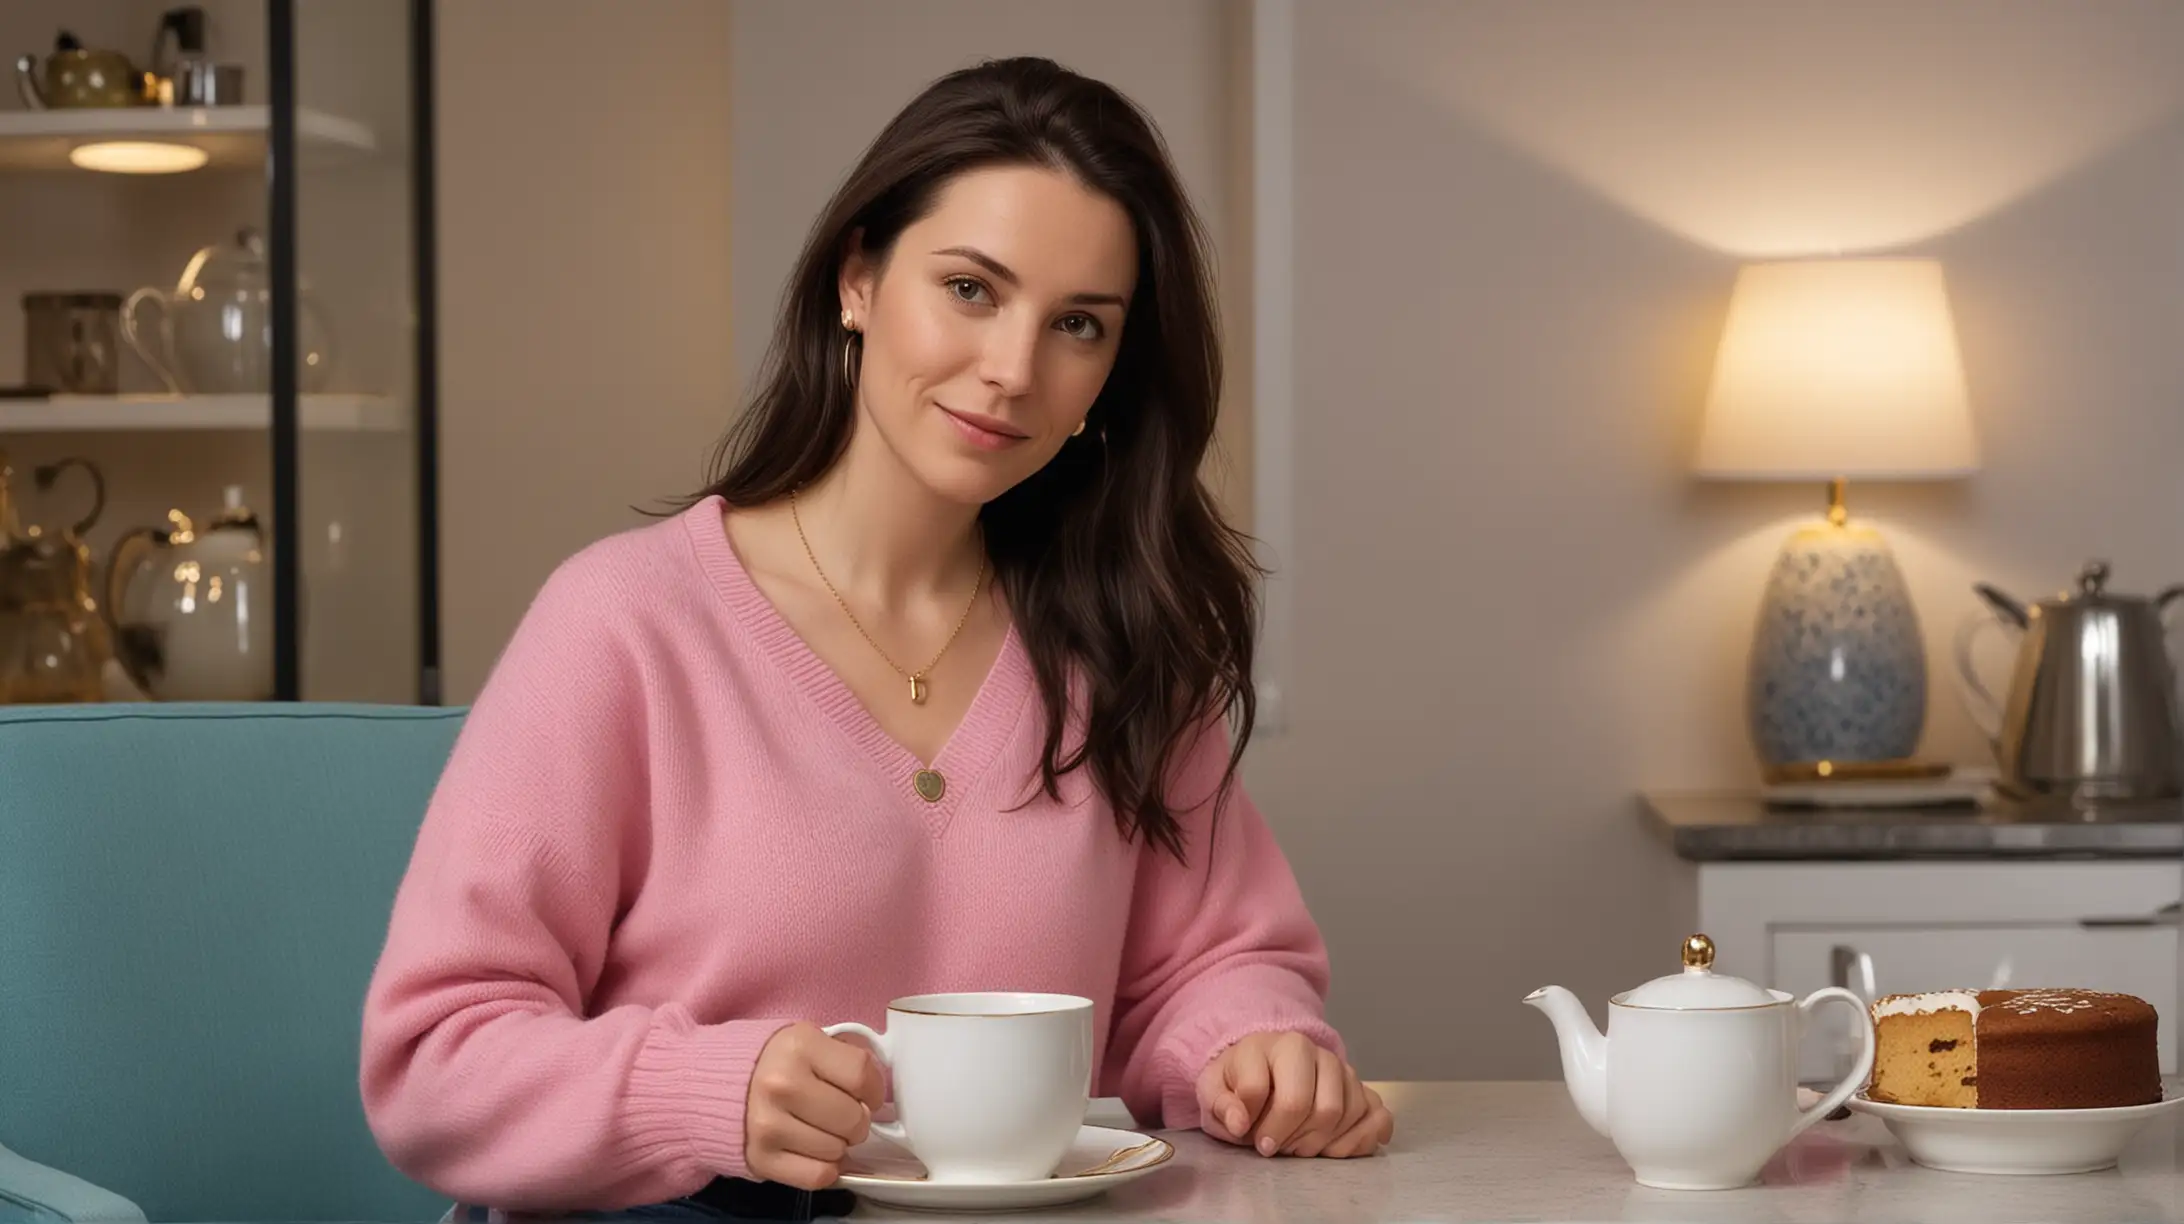 In a small kitchen at night, 33 year old pale relaxed white woman with long dark brown hair parted to the right sitting in a chair, wearing a pink sweater, blue jeans, and gold necklace. There is exactly one mug of tea and white teapot on the table. Night urban dense high rise background.